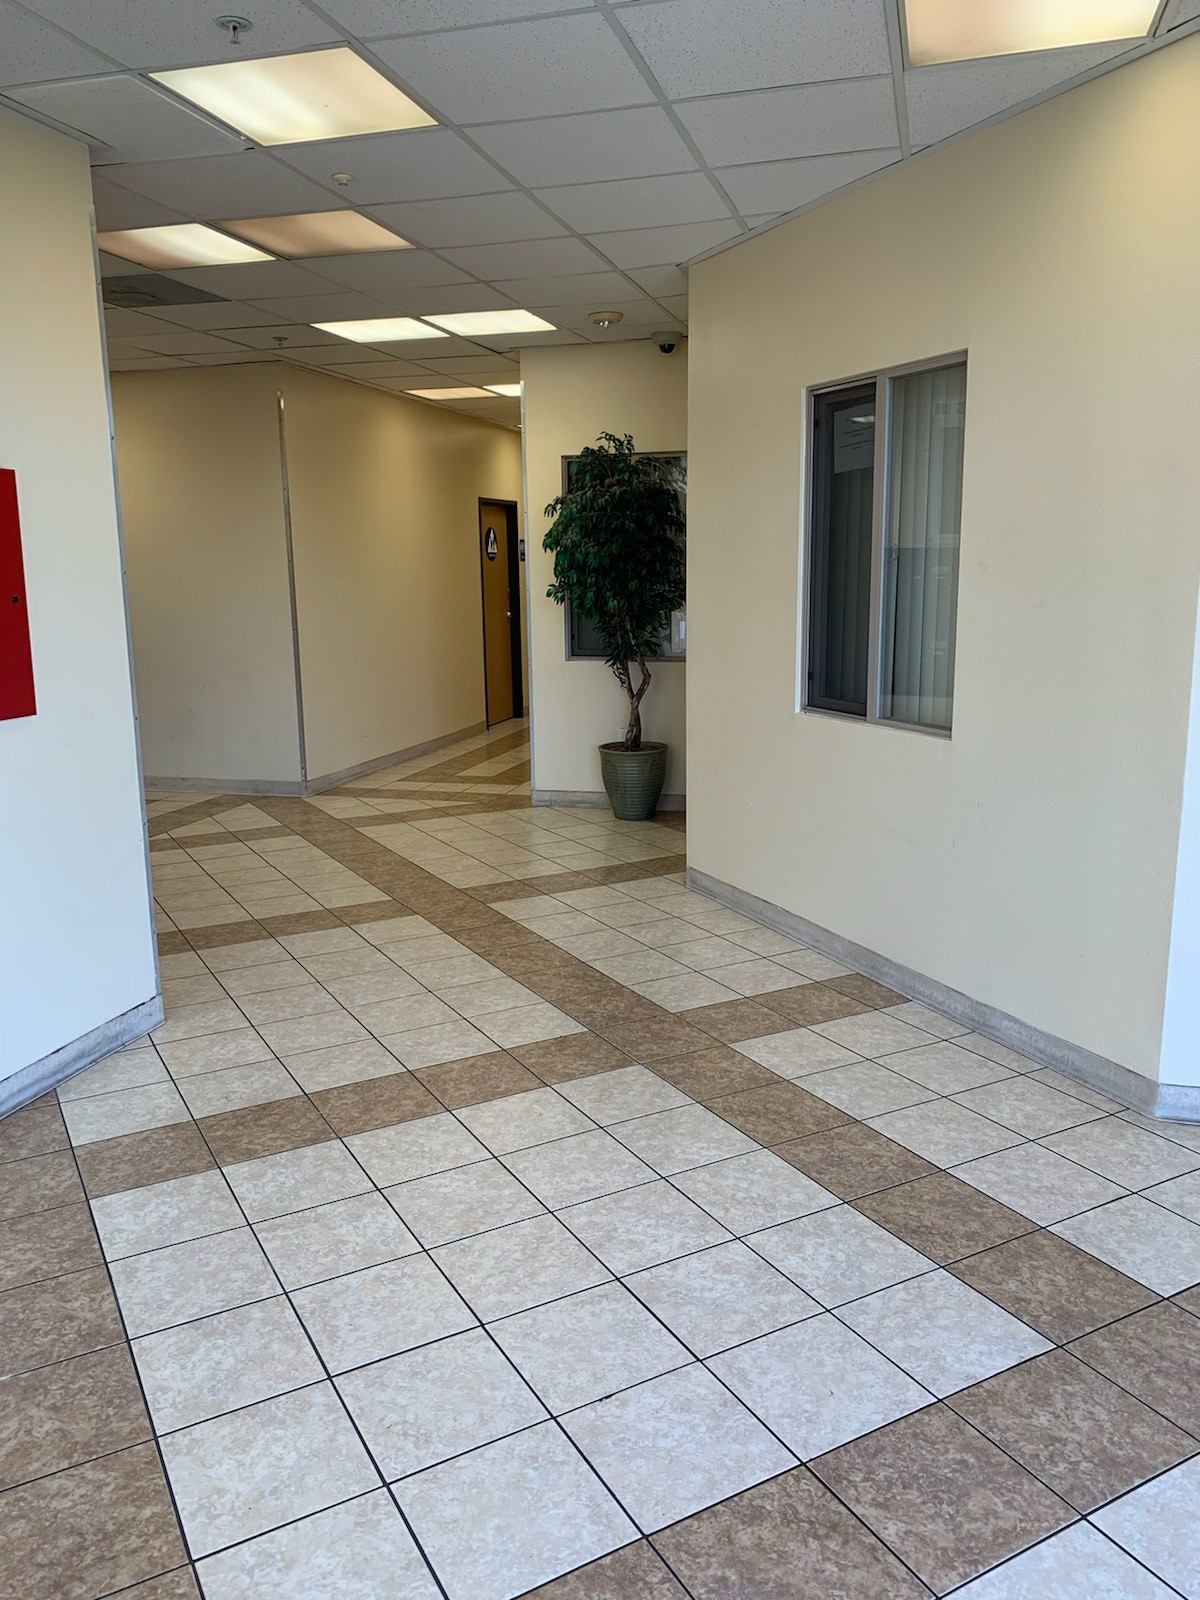 Lobby area with a reception window, a floor plant, and a gender neutral restroom in the back. Floor is tiled.